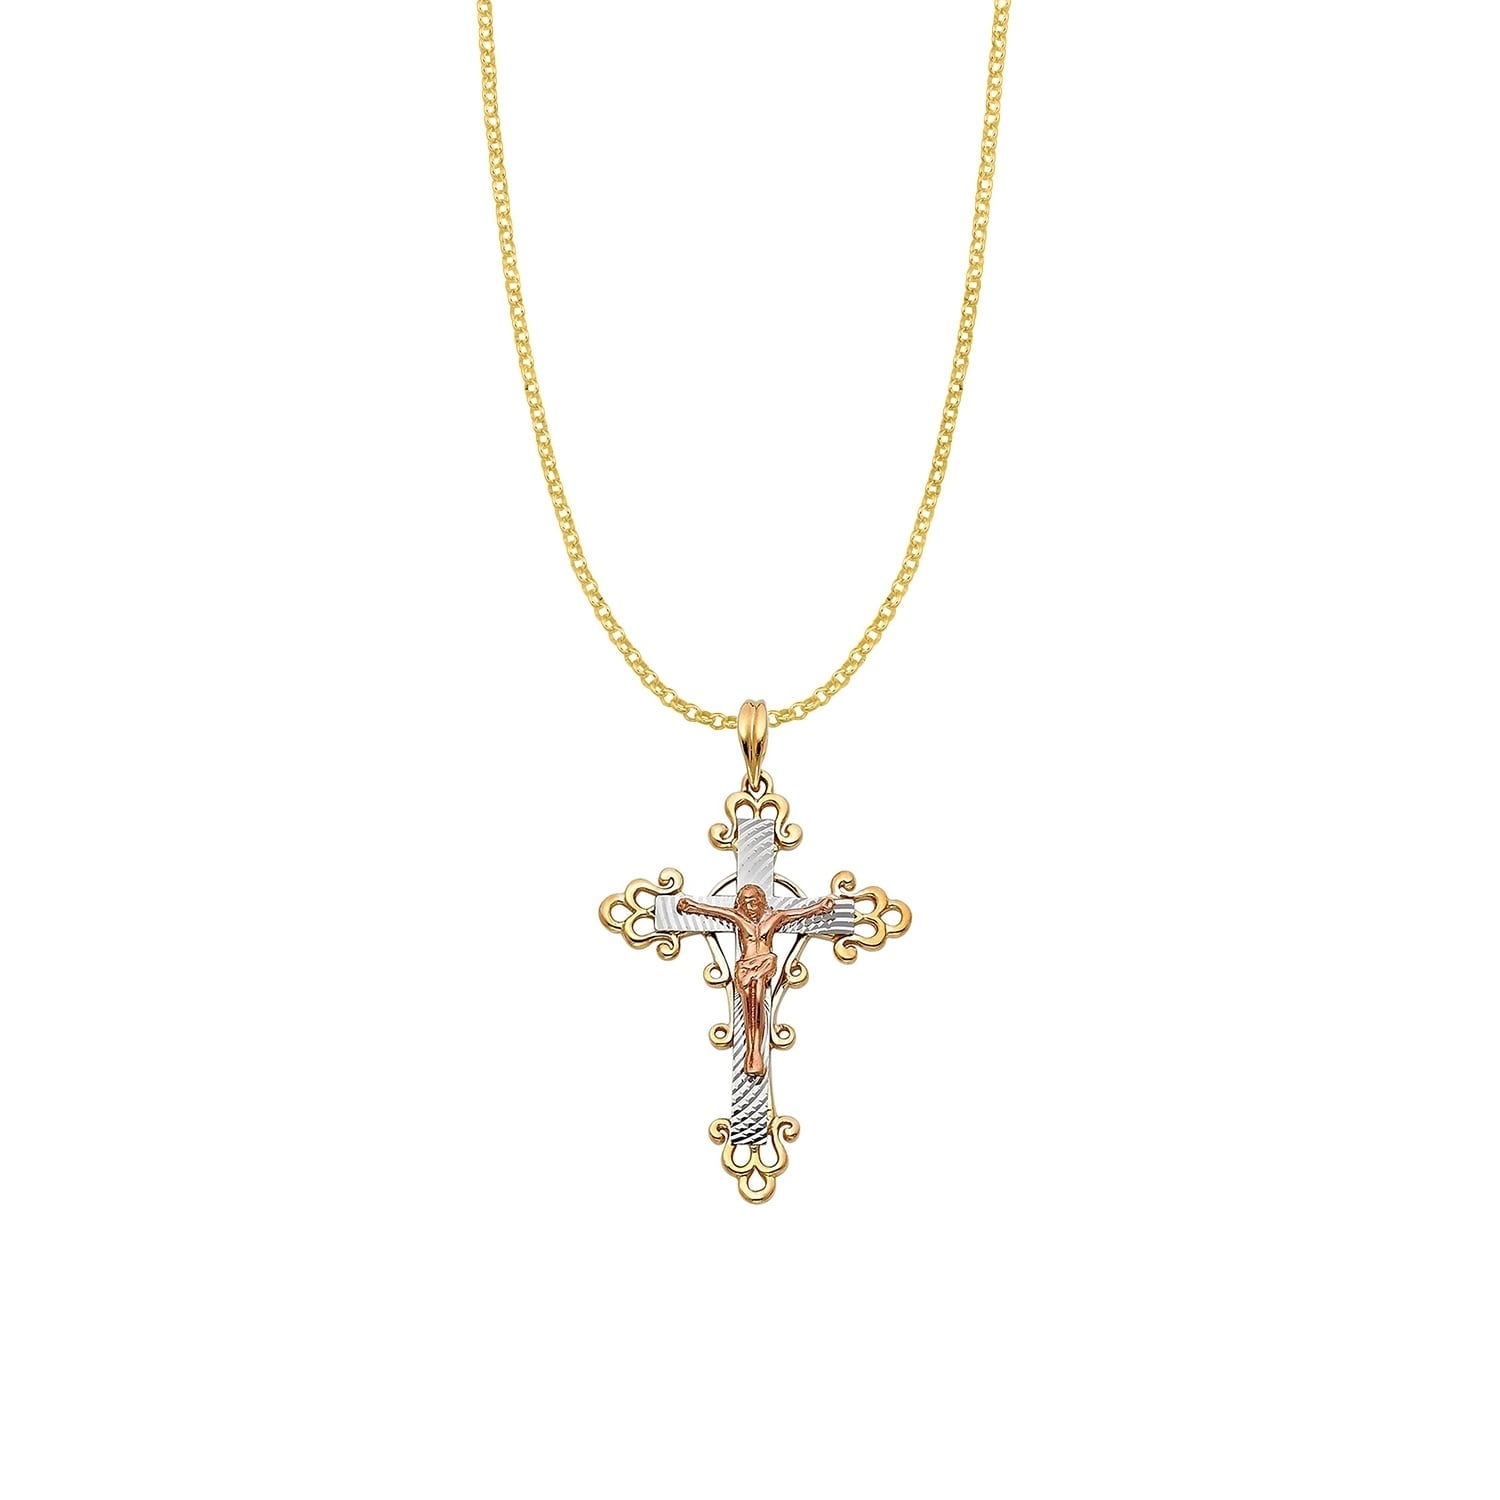 The World Jewelry Center 14k Yellow Gold CZ Religious Cross Pendant with 1.6mm Cable Chain Necklace 